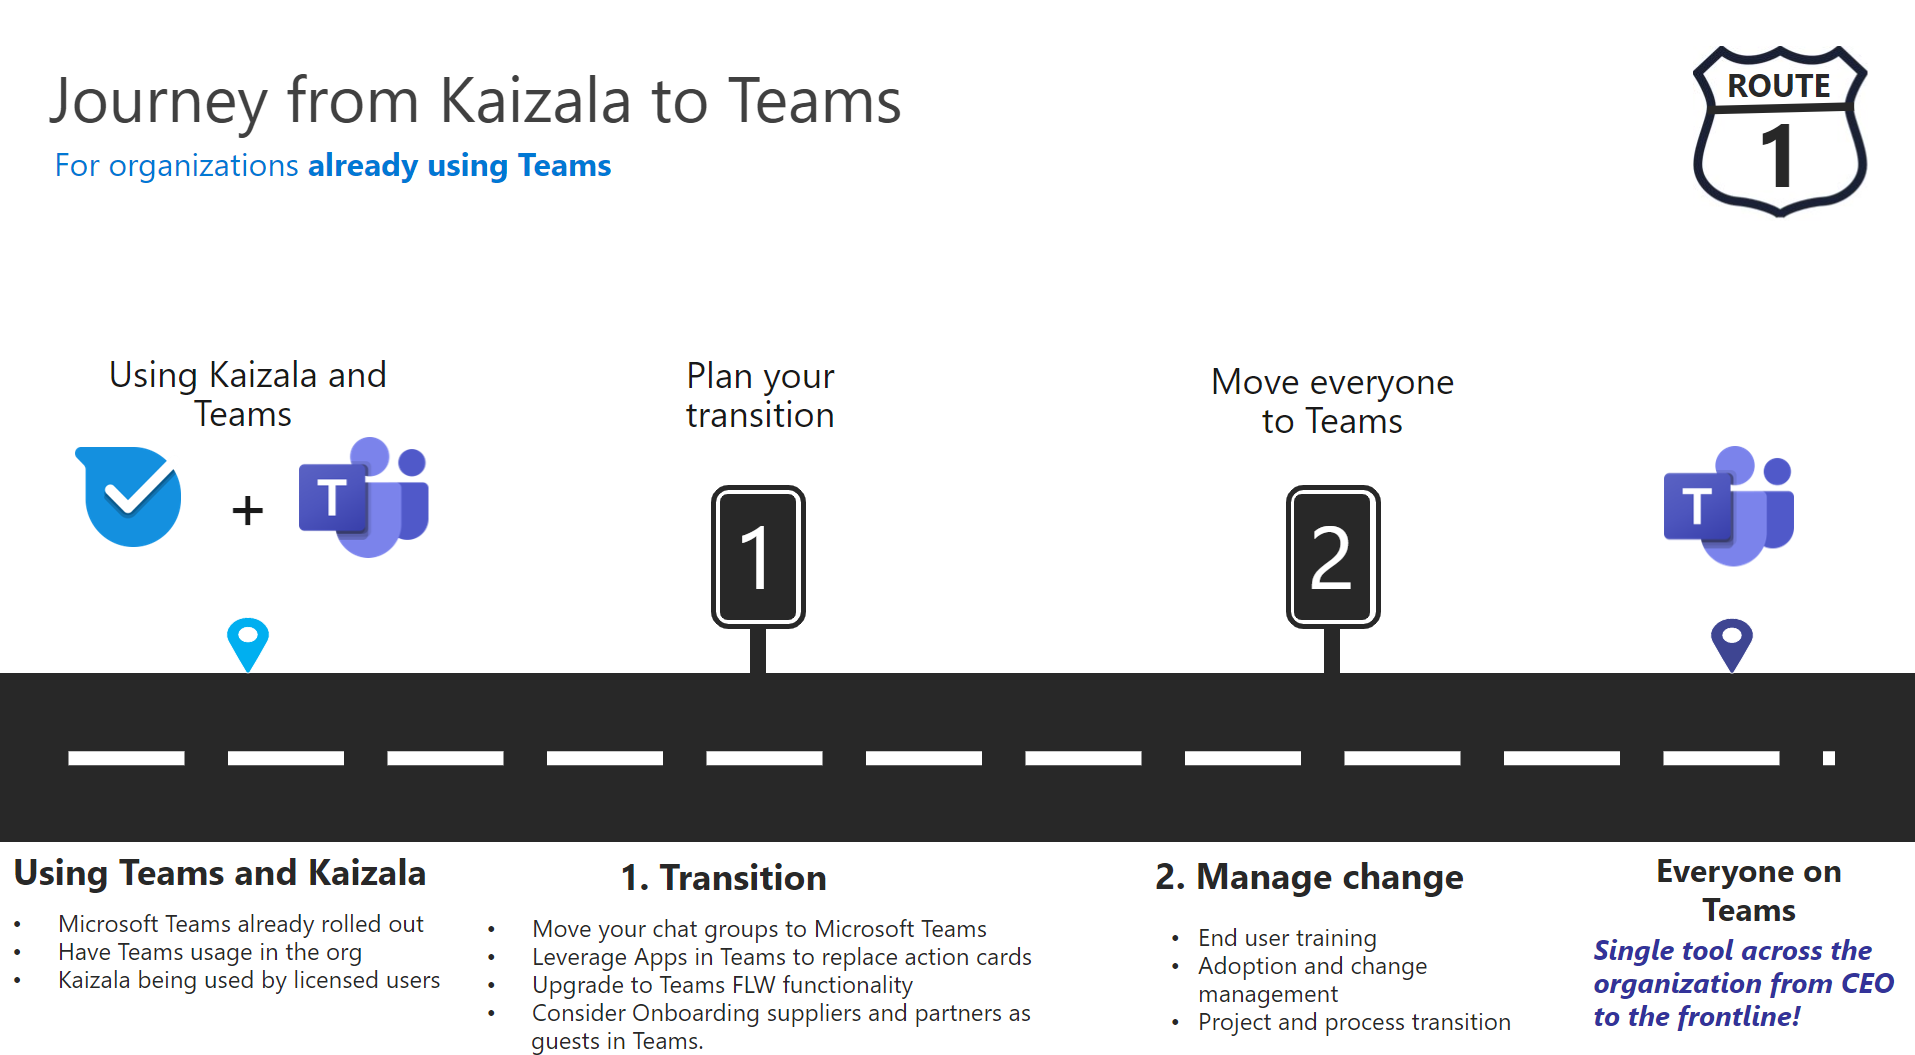 Screenshot that depicts the path for organizations currently using Teams